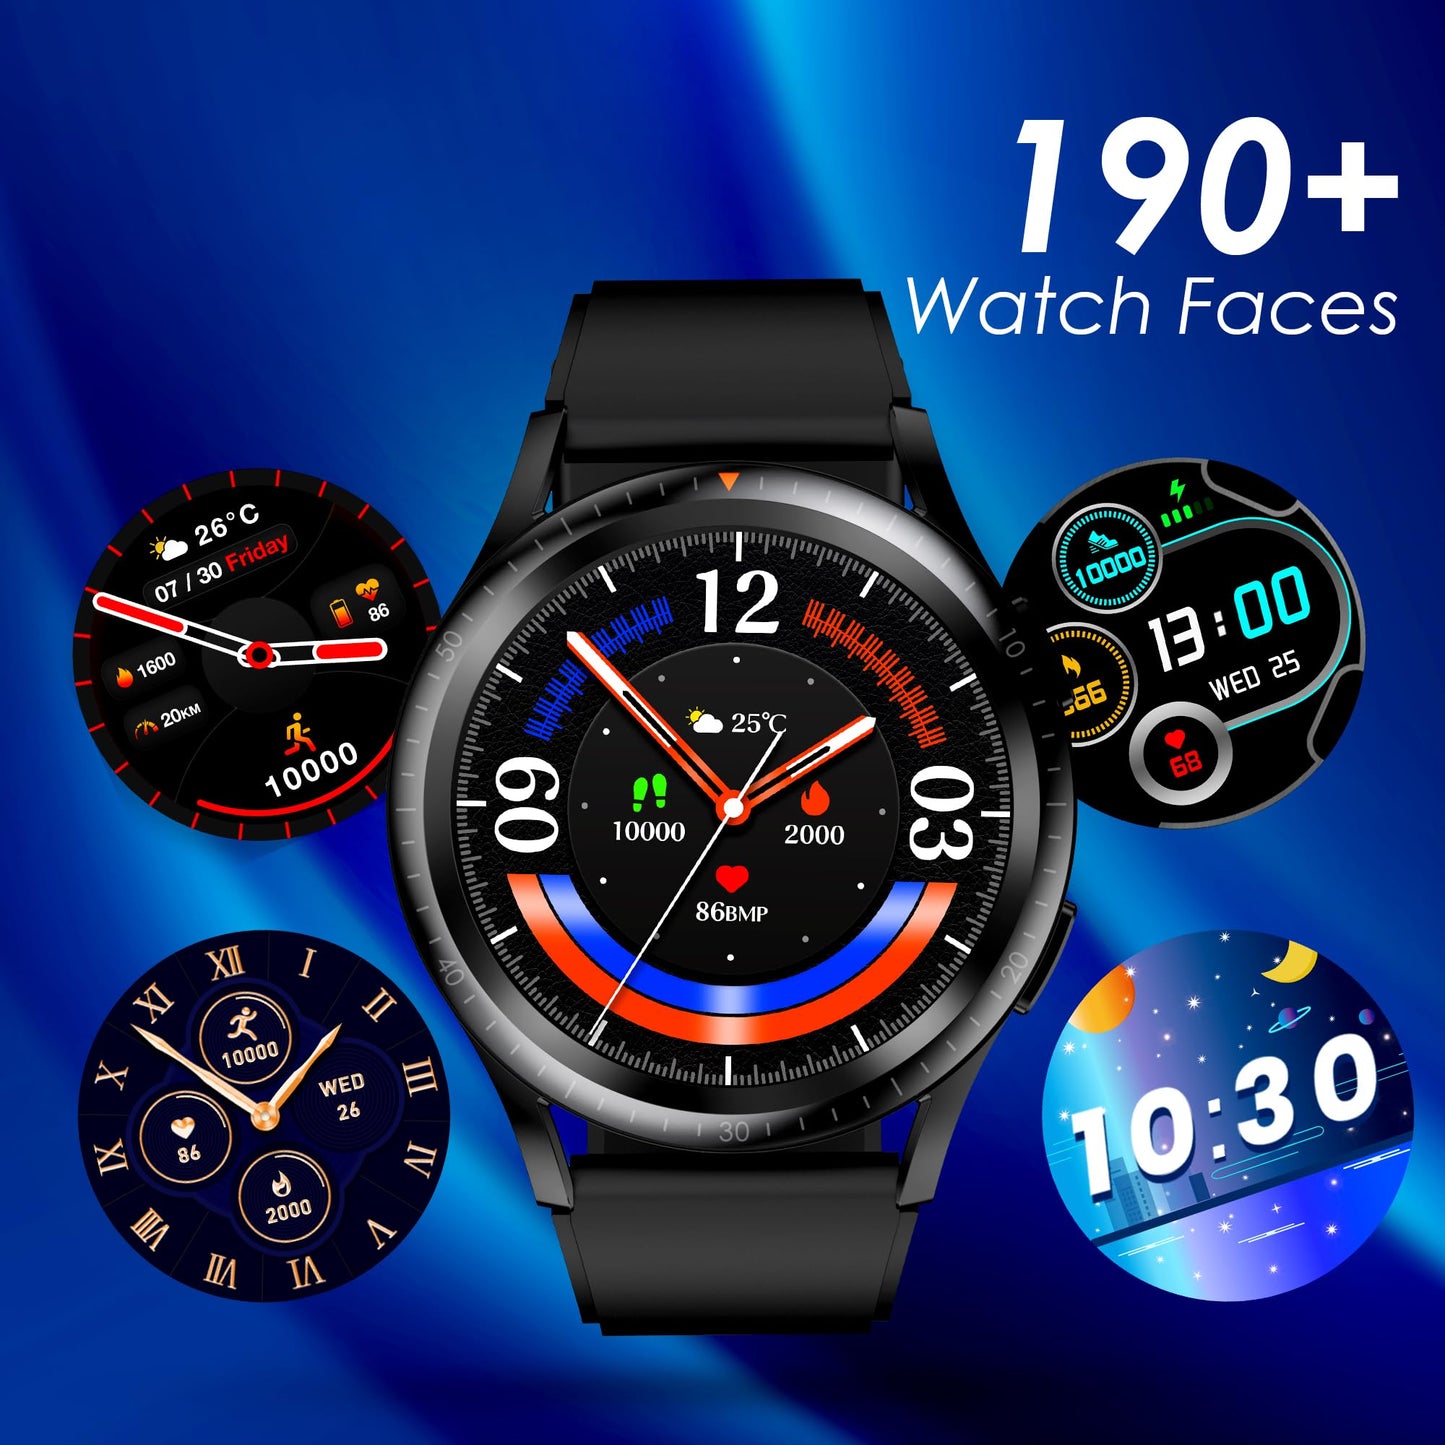 Itel 1GS 1.32" HD IPS Superbright Display Smartwatch with Bluetooth Calling, Metal Alloy Dial, 15 Days Battery Life, IP68 Water Resistant, SpO2 and Heart Rate Monitoring, 190+ Watch Faces (Black)